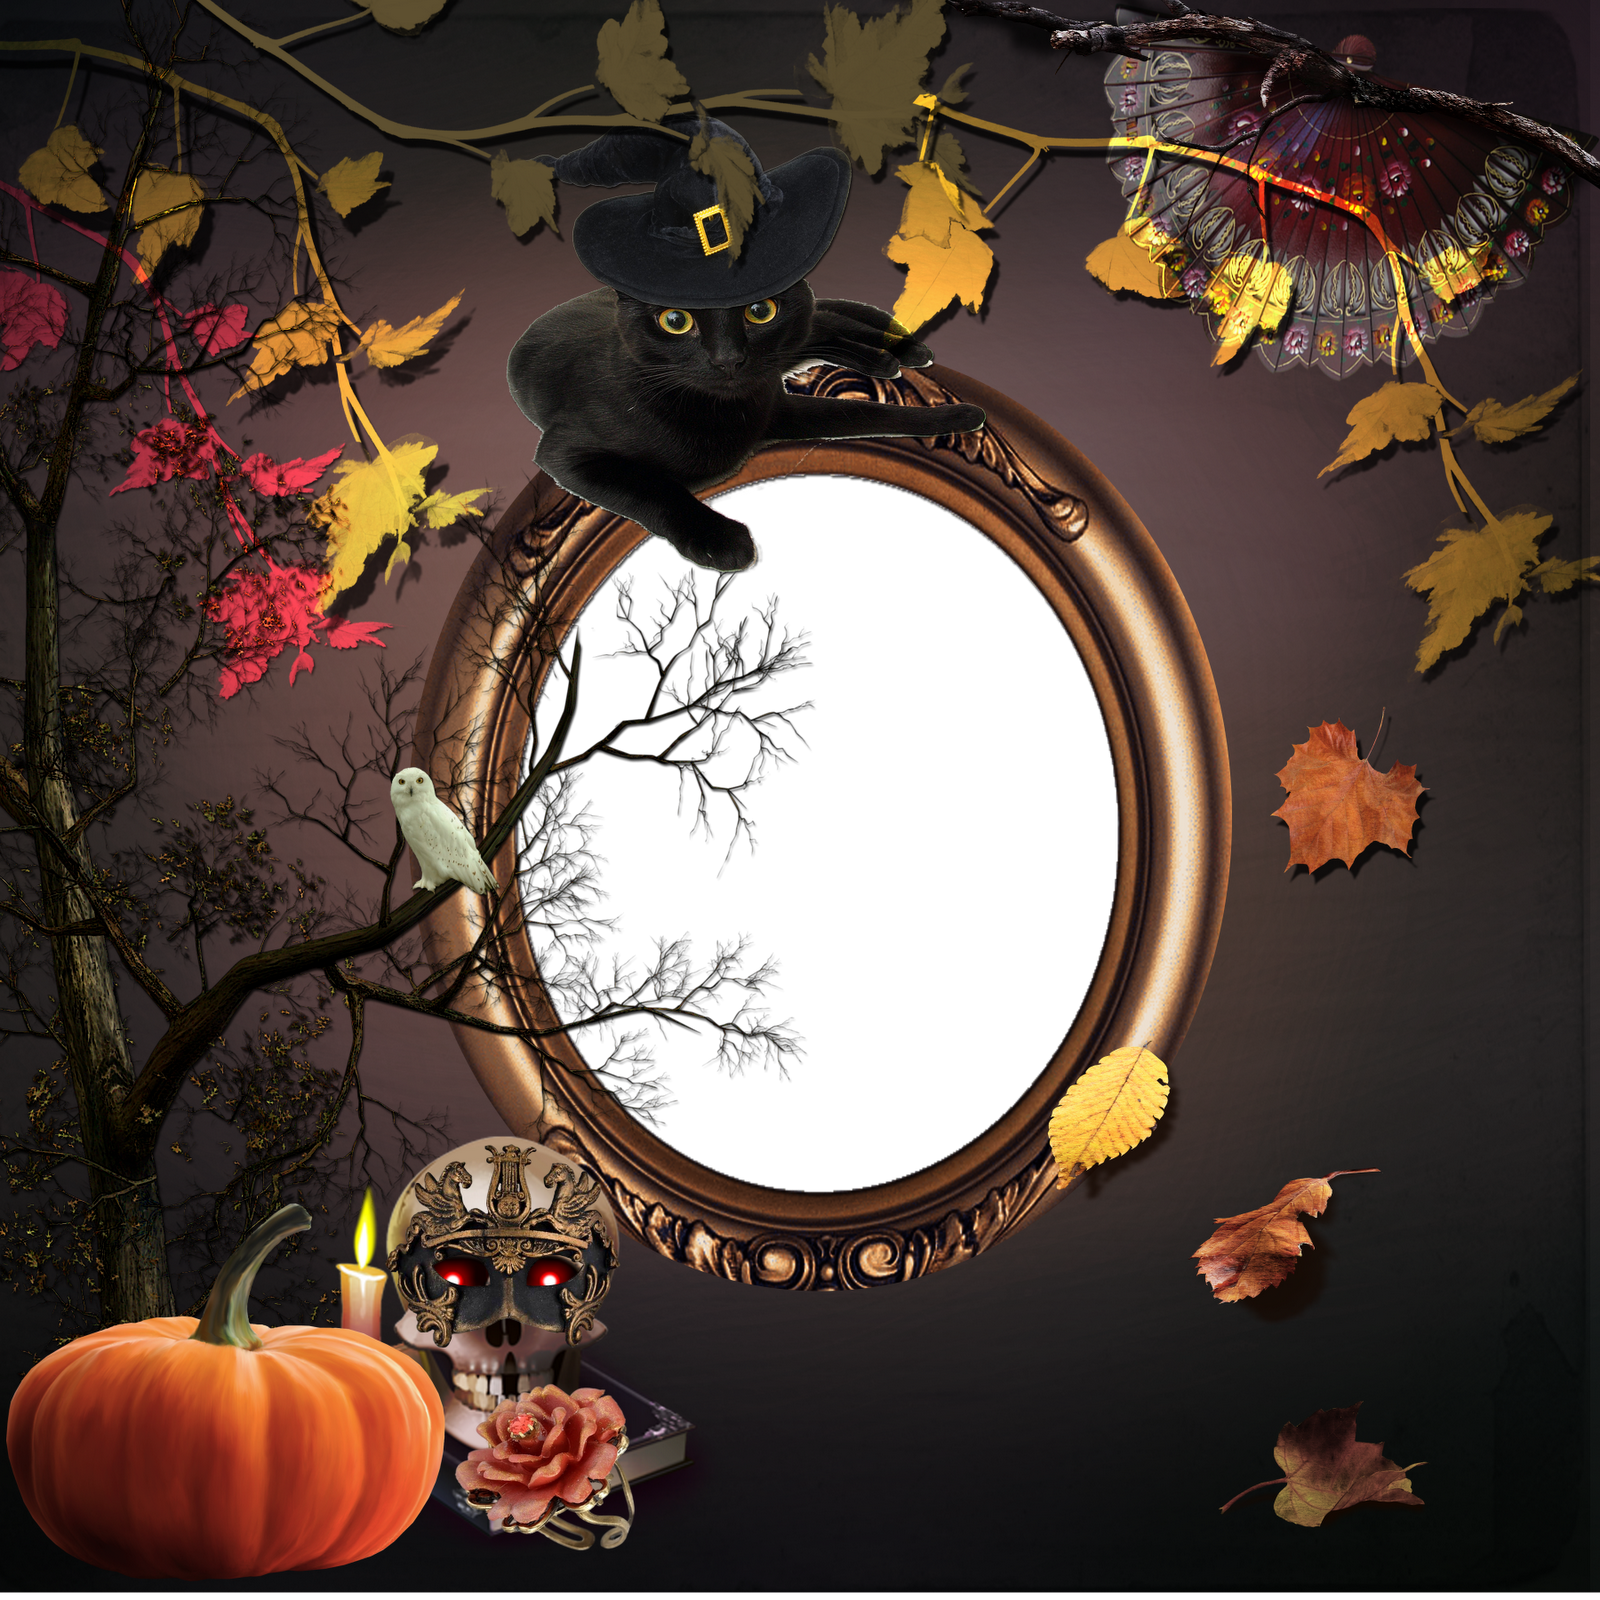 Background Frame Halloween PNG Transparent Background, Free Download #31344  - FreeIconsPNG